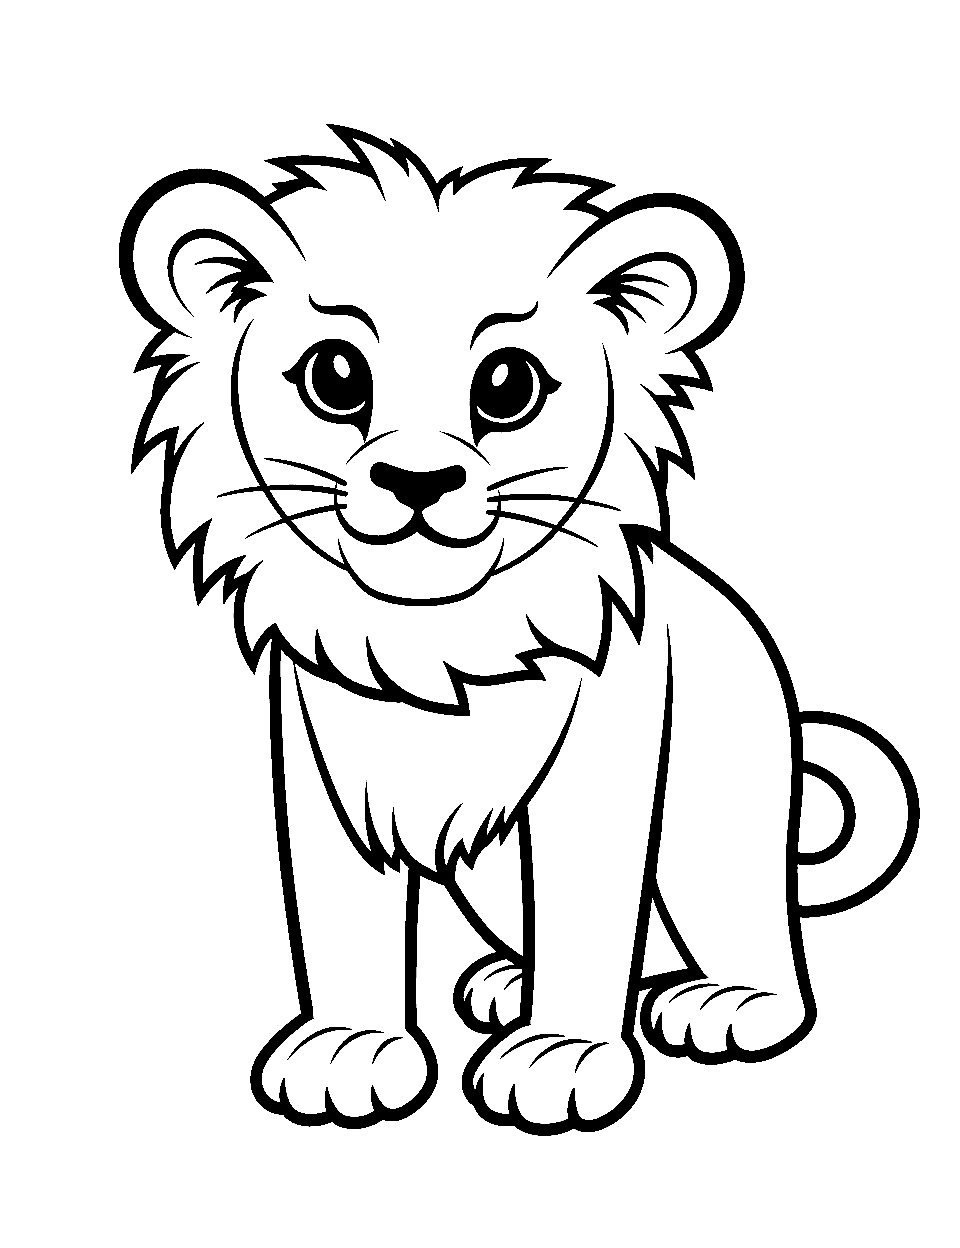 Drawing Lessons for Kids with the Monart Method - How to Draw Lions!-saigonsouth.com.vn